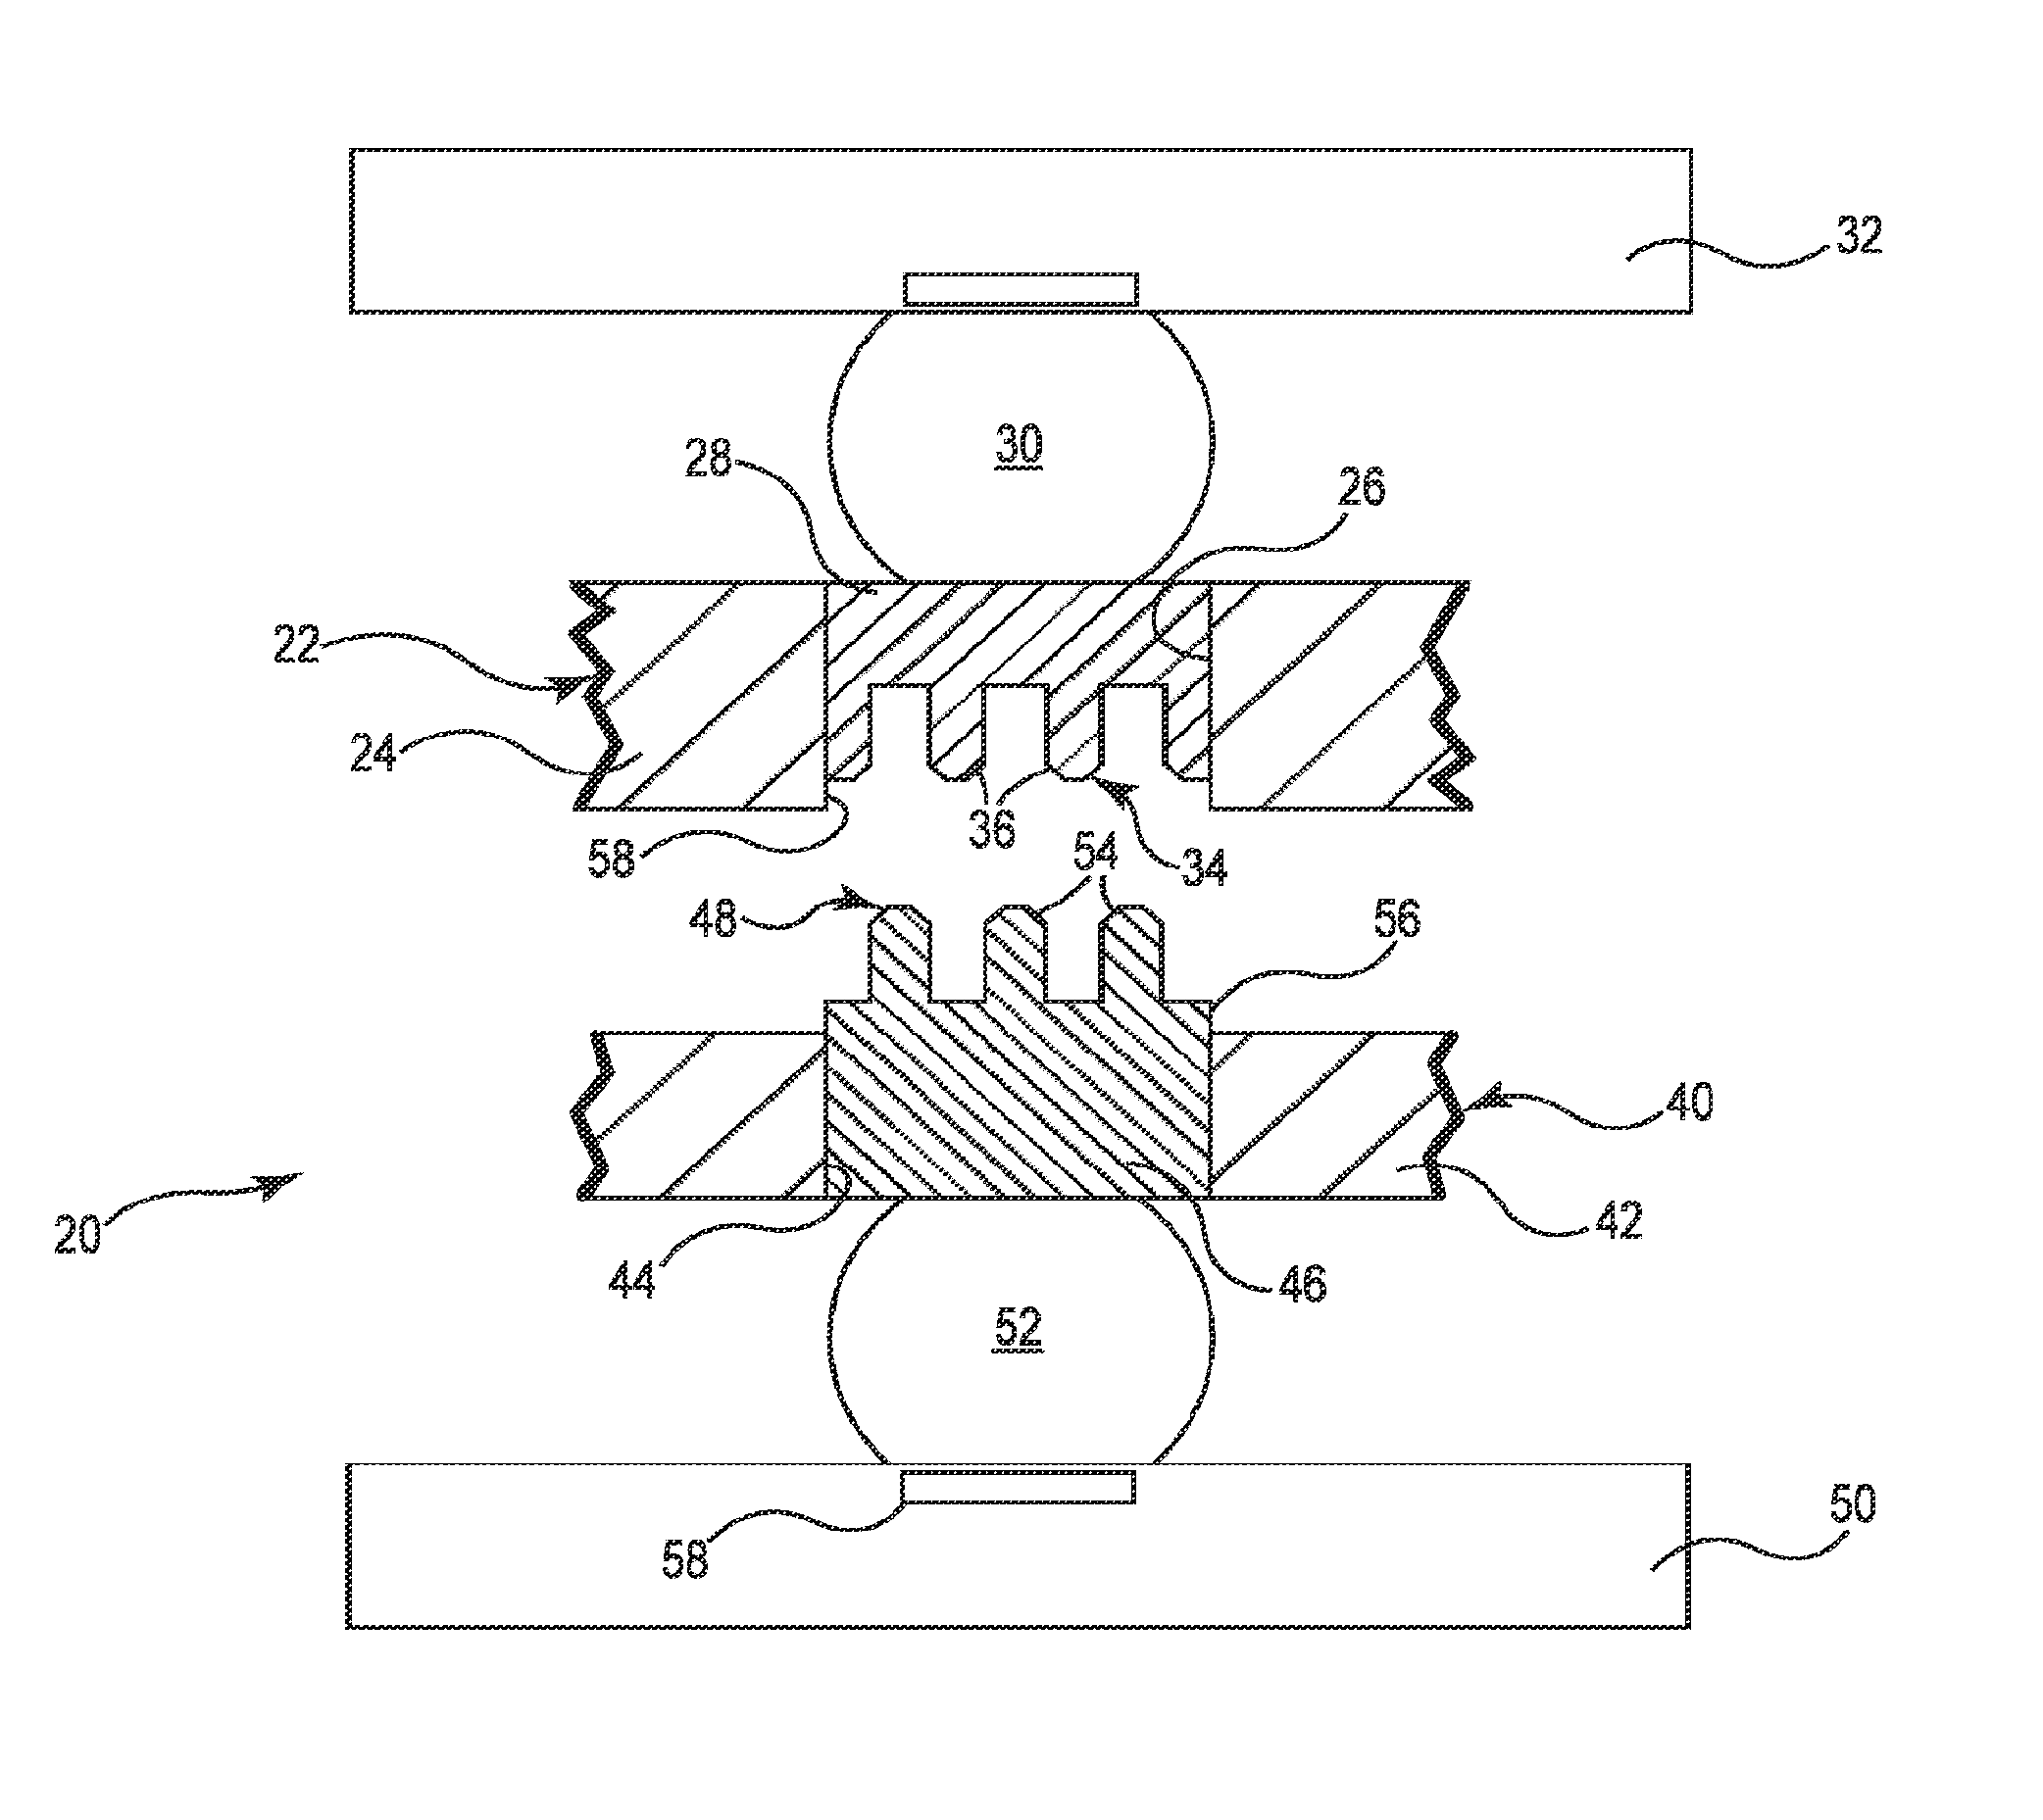 Semiconductor device package adapter